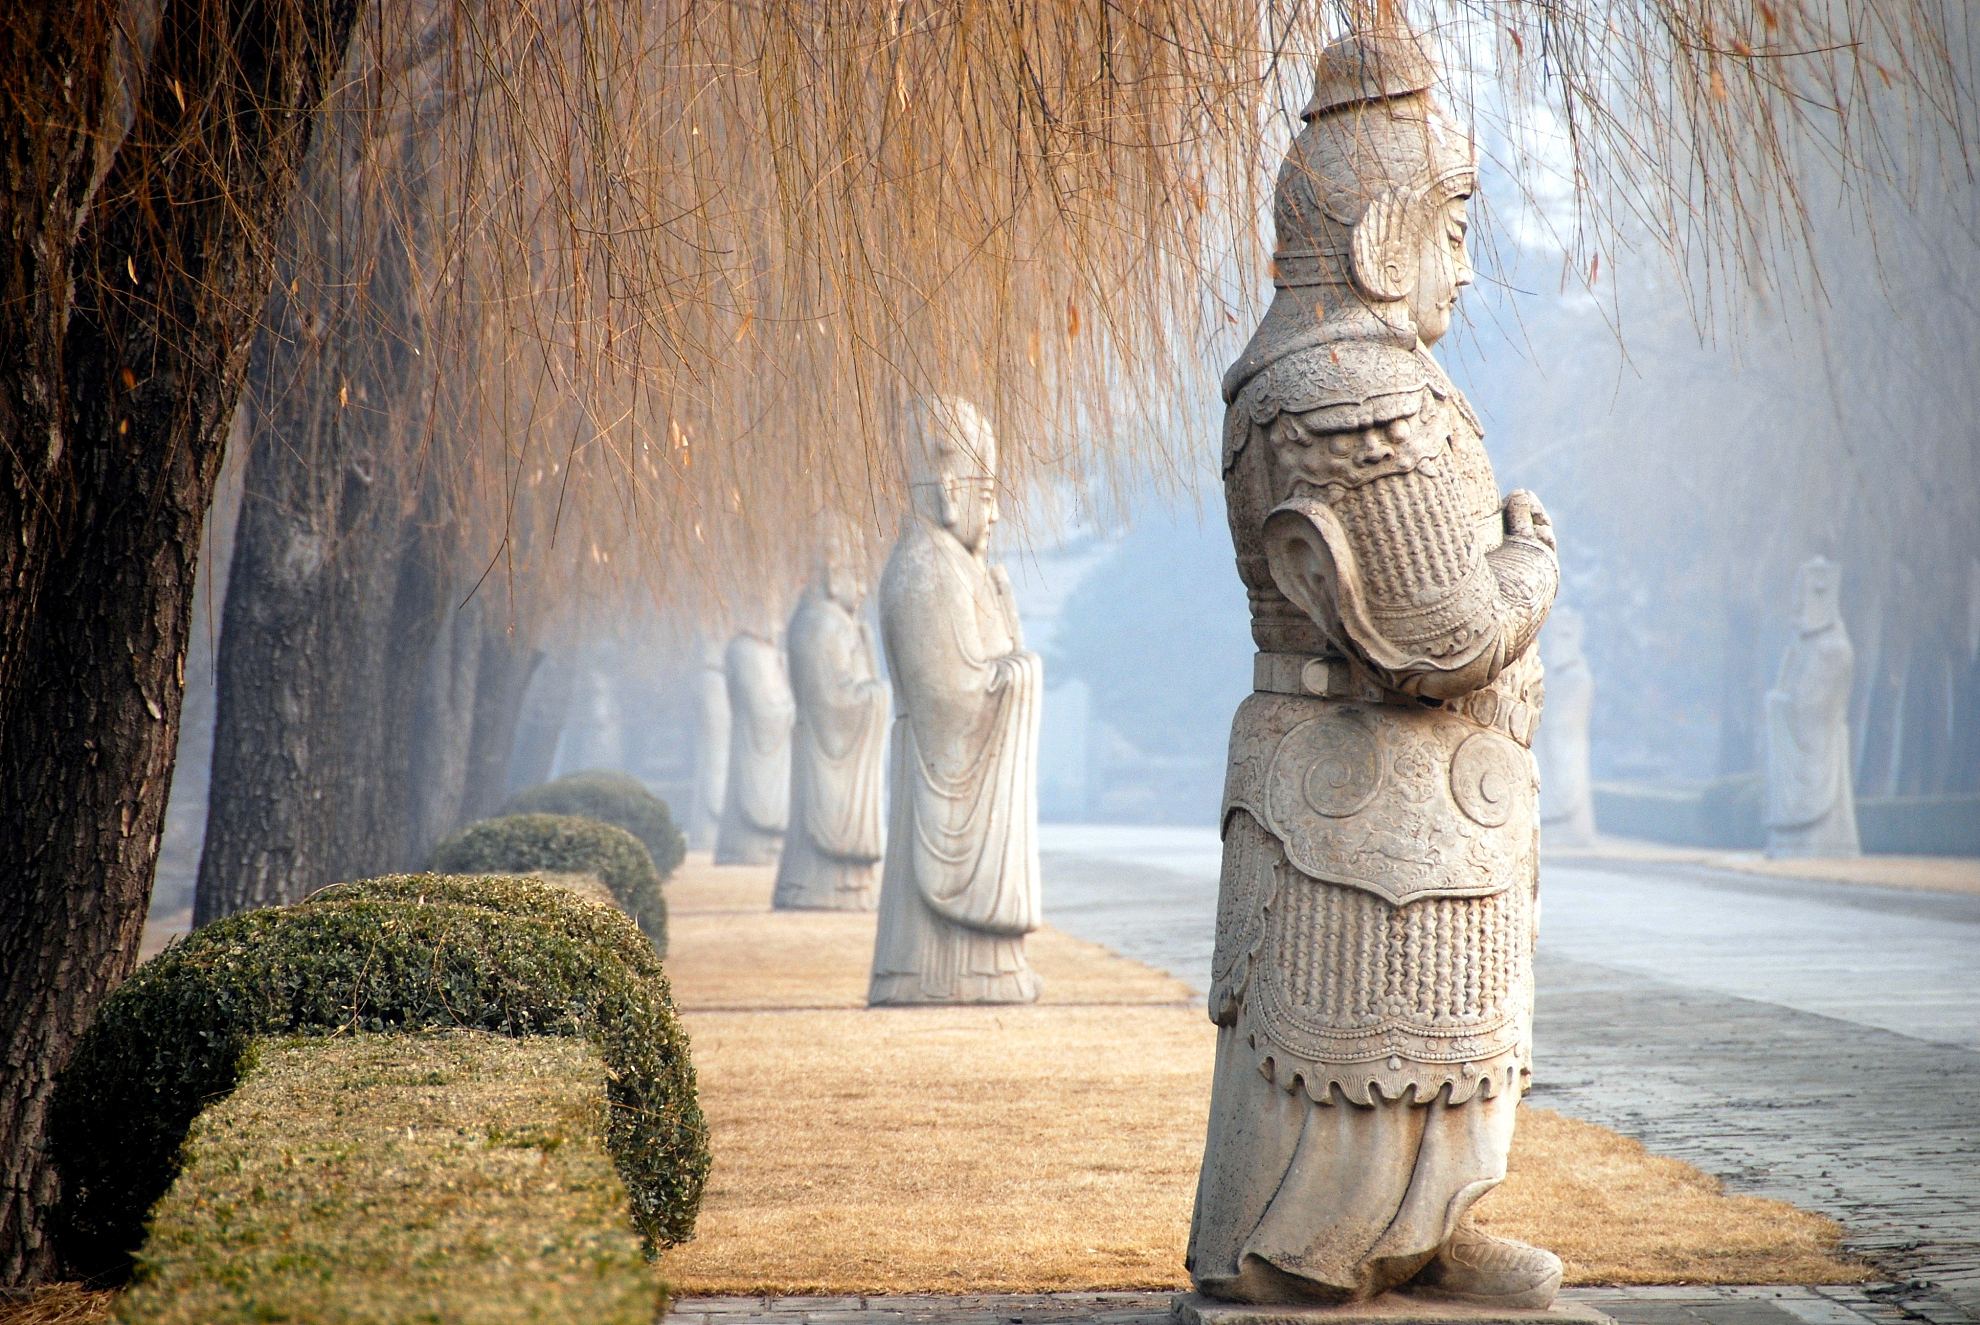 The Majestic Ming Tombs near Beijing